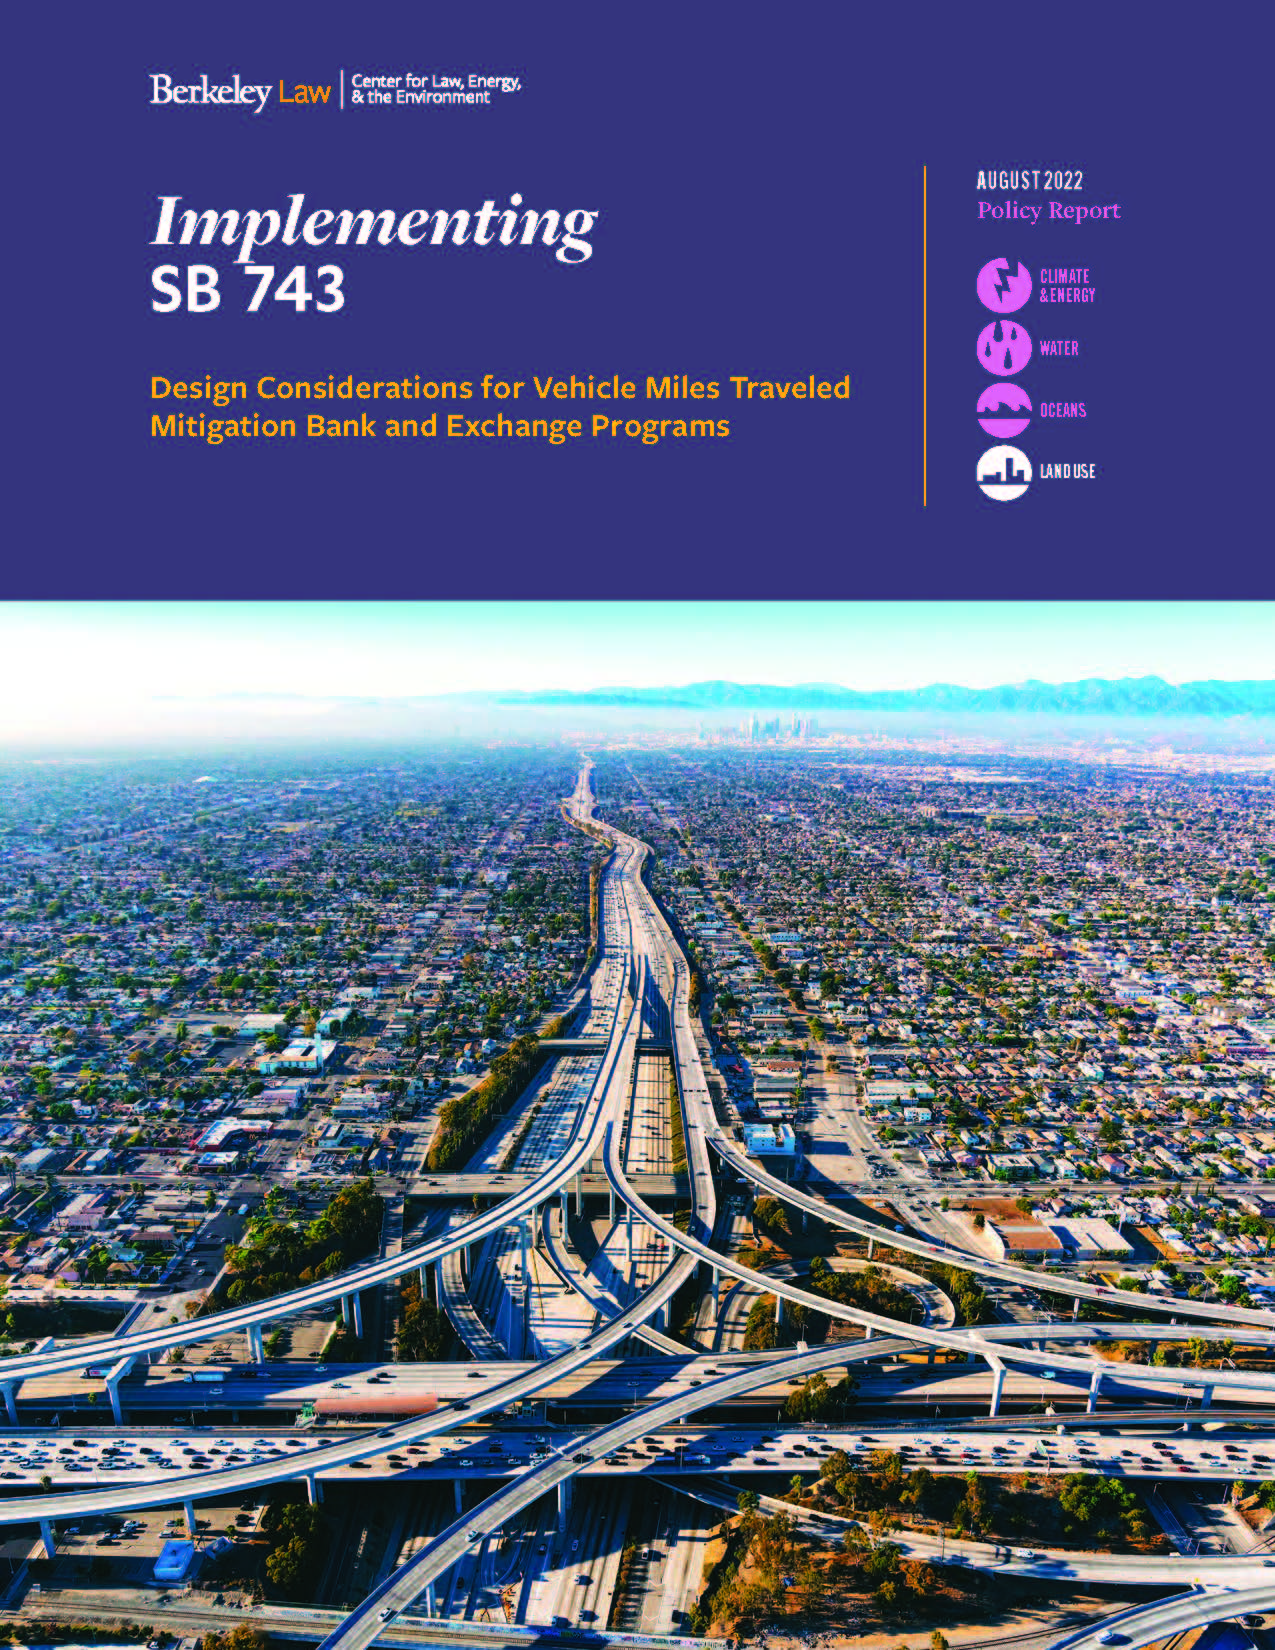 Report cover. Title "Implementing SB 743" and image of freeways in urban landscape.